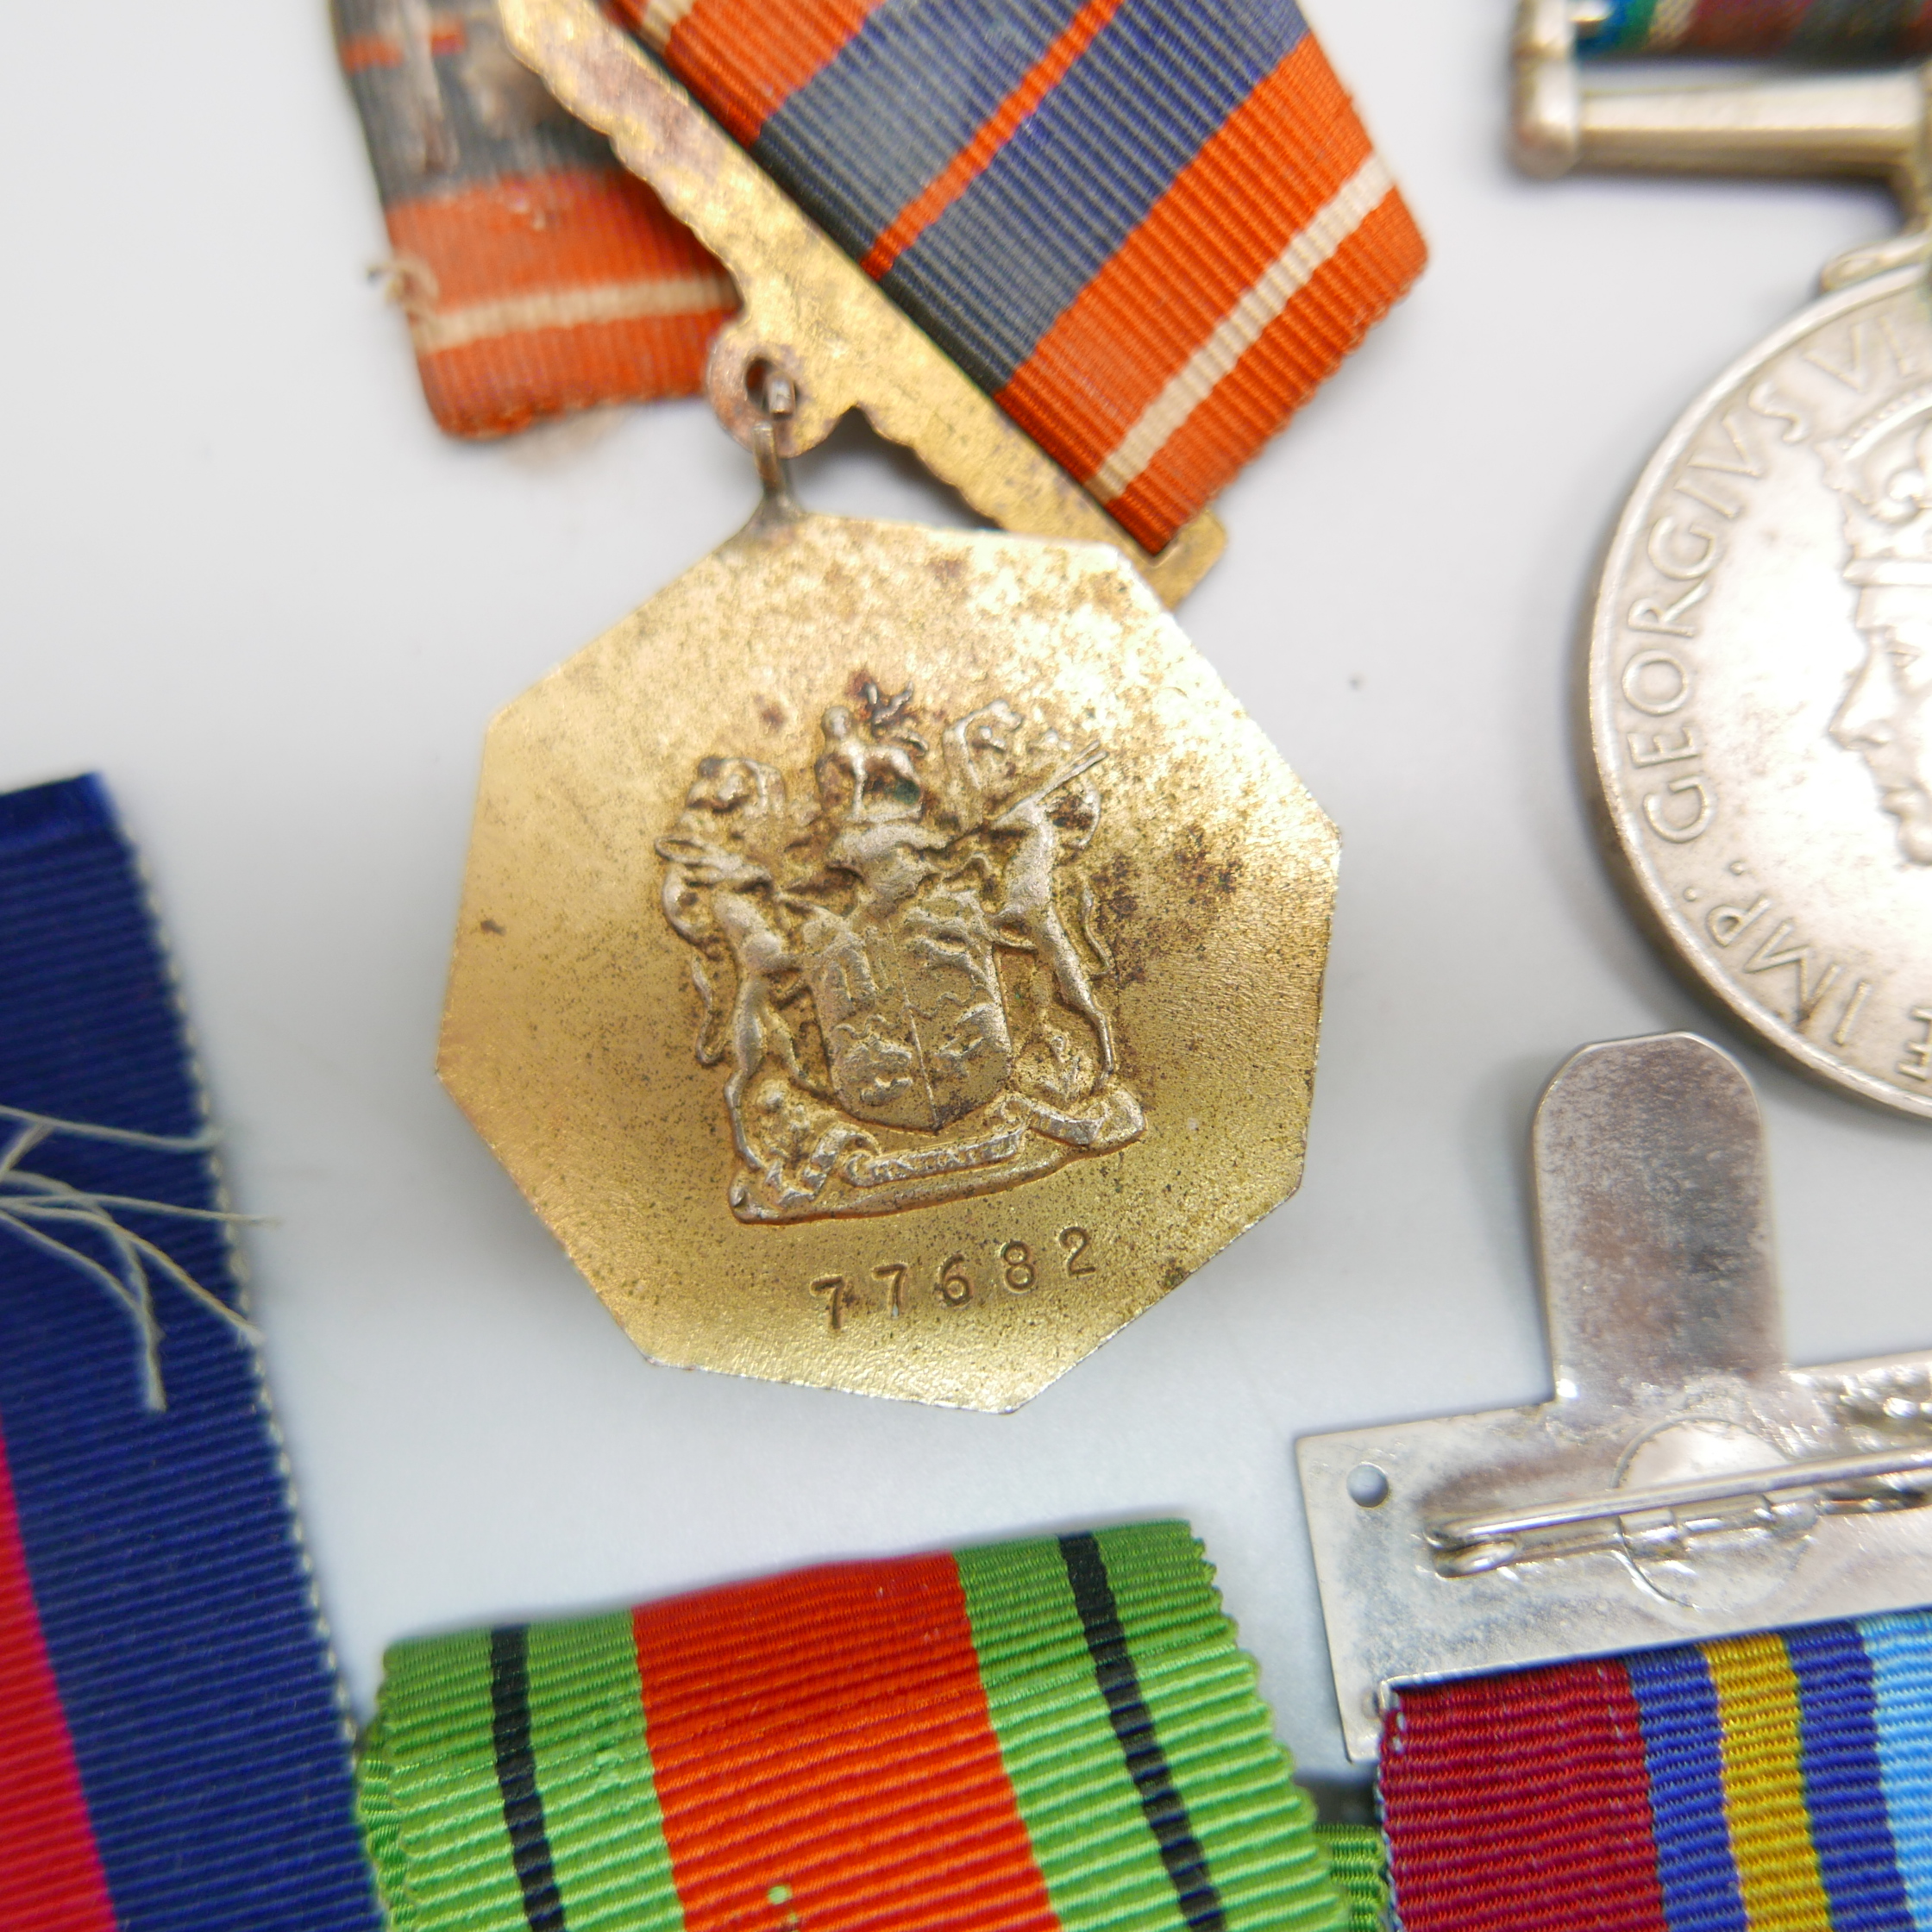 Eight medals, including two Africa Service Medals to 592810 D.T. Howells and 133965 C.W. Chapman - Image 3 of 11